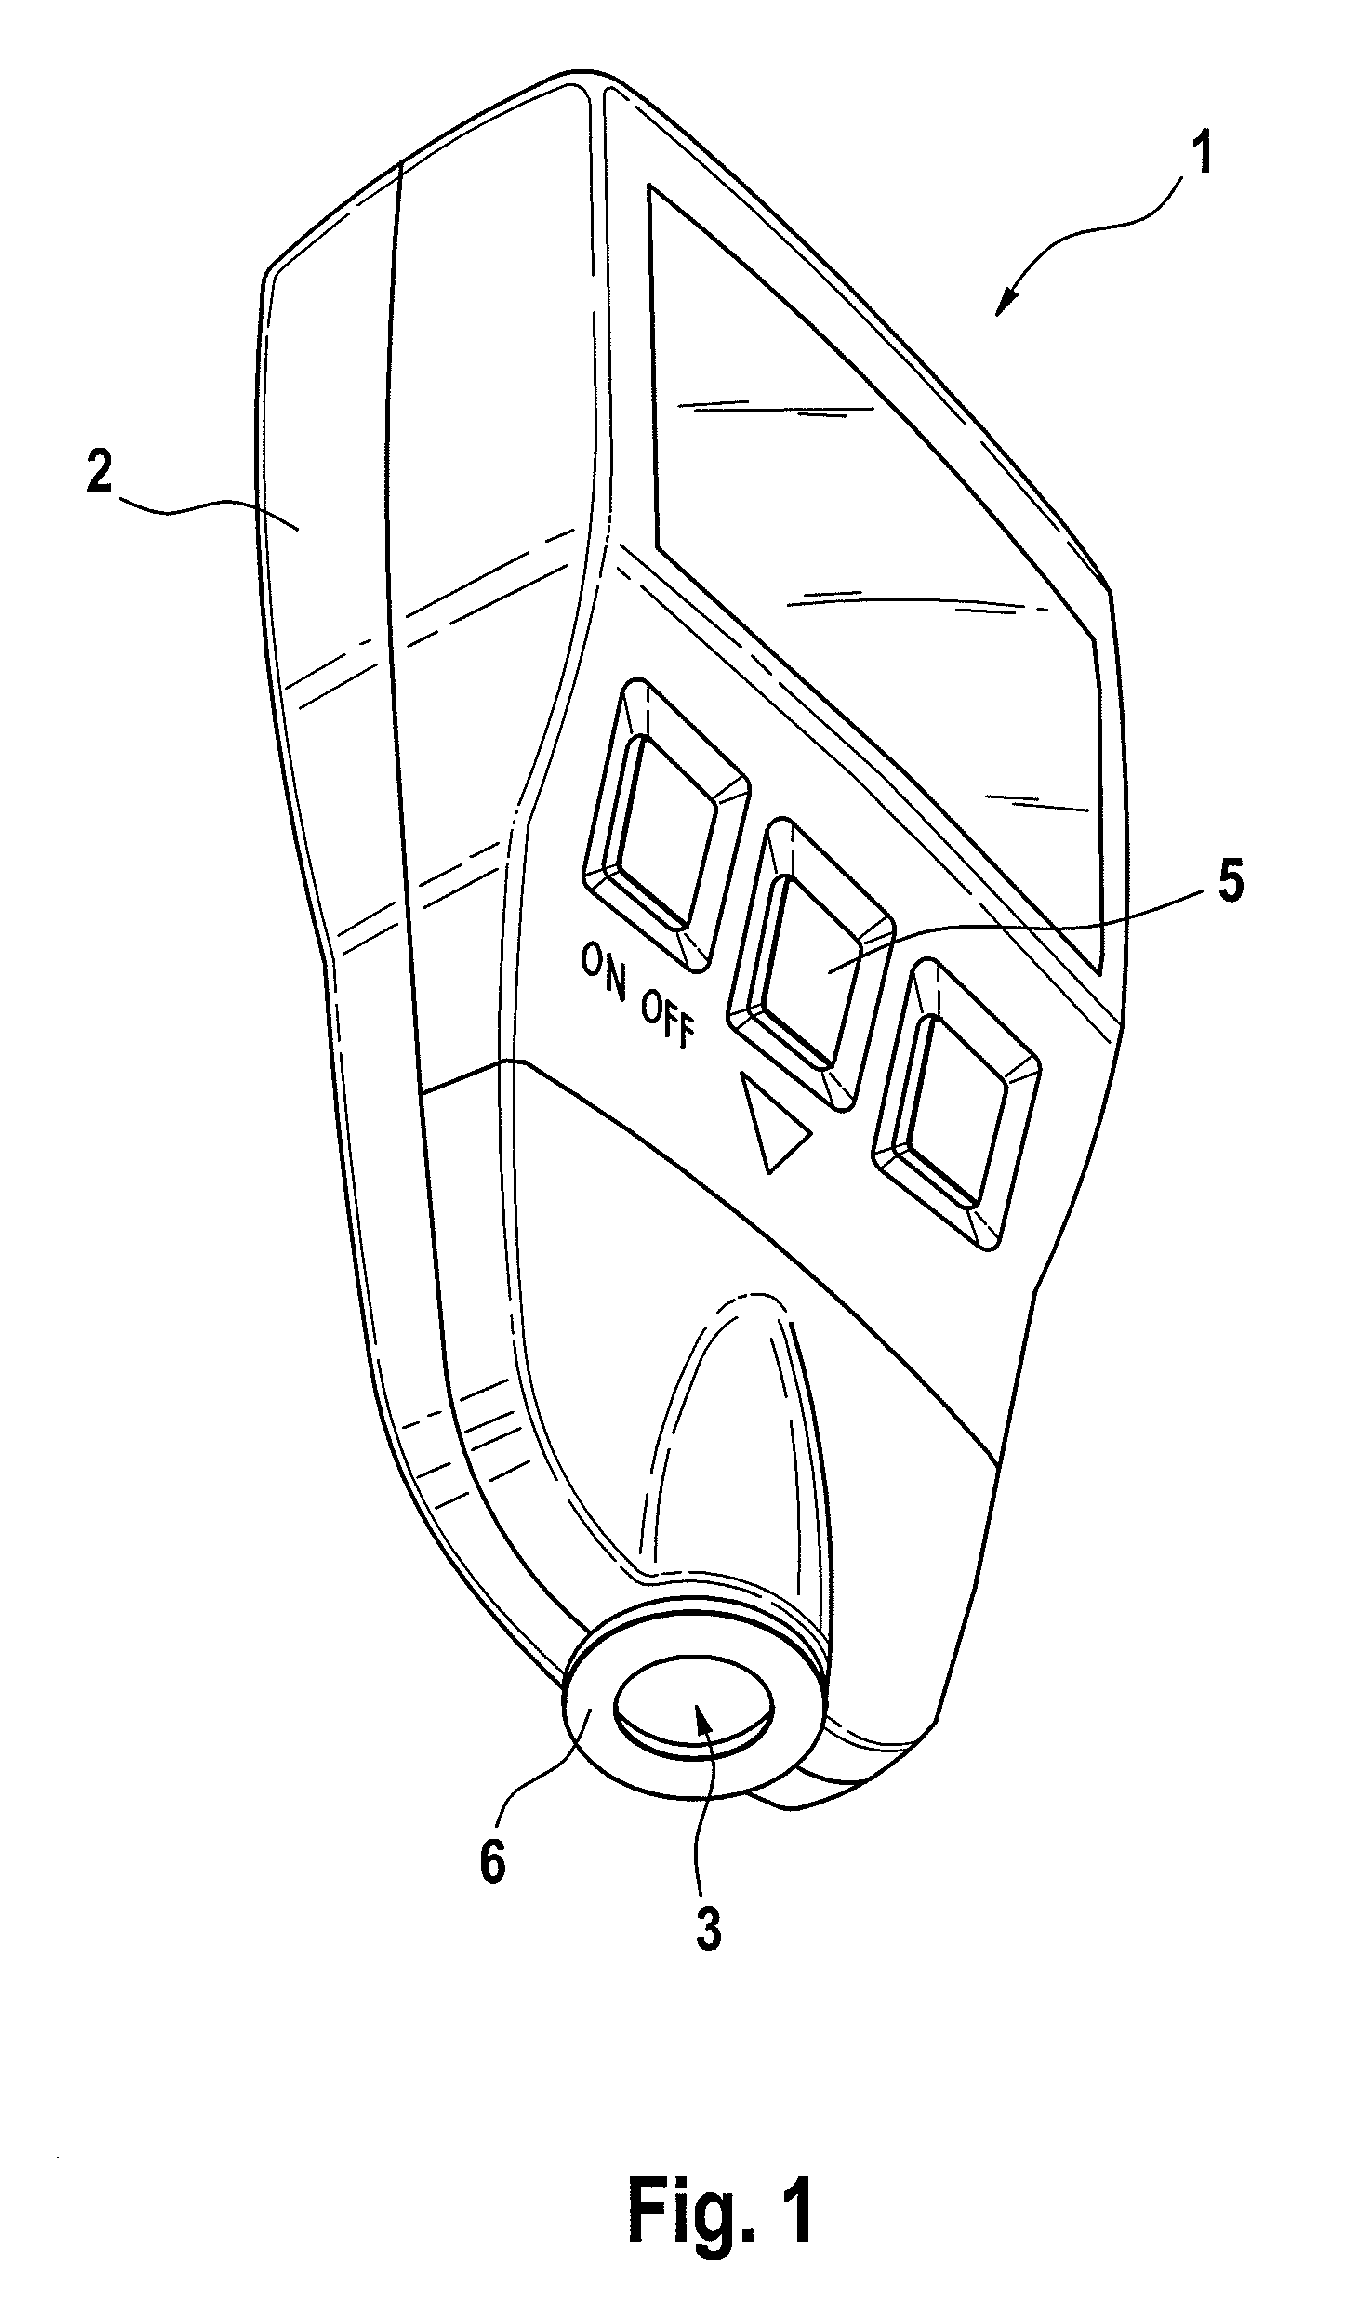 Method for creating a puncture wound and handheld apparatus suitable therefor